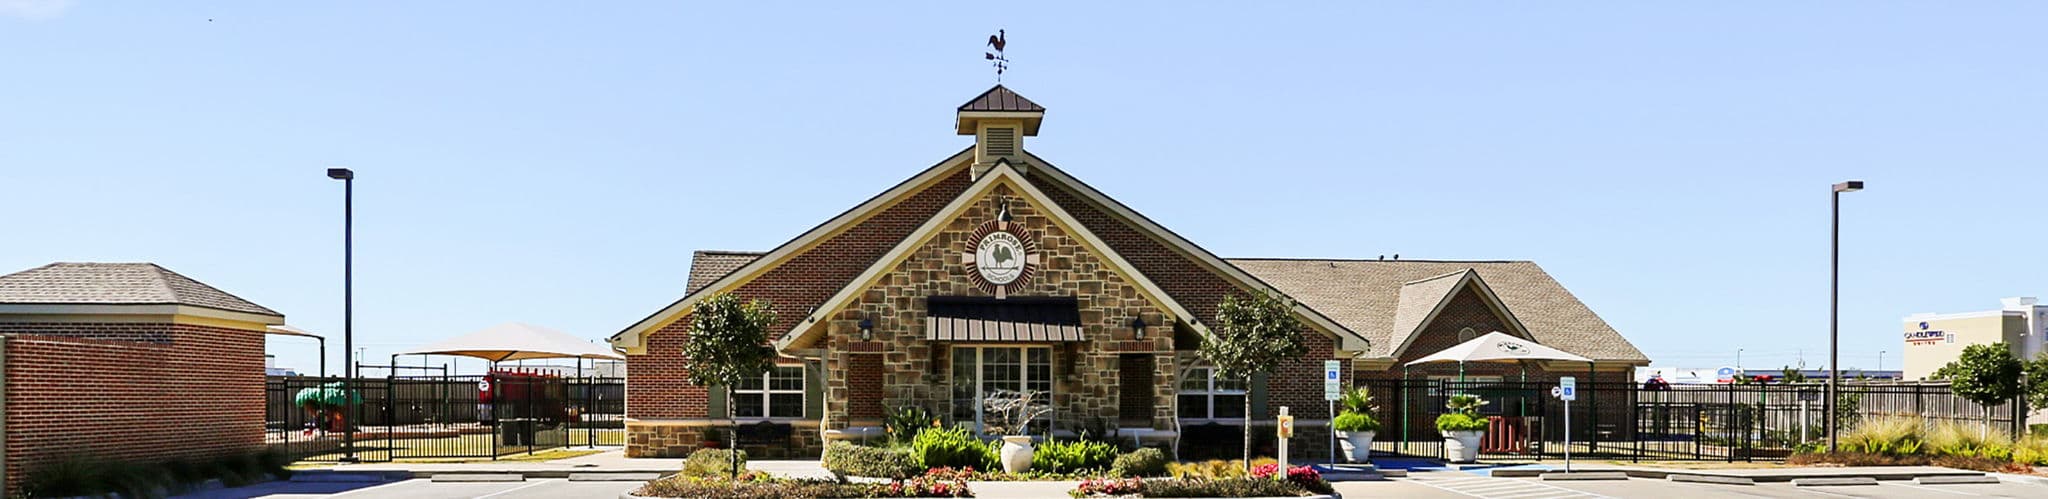 Exterior of a Primrose School of League City at Victory Lakes